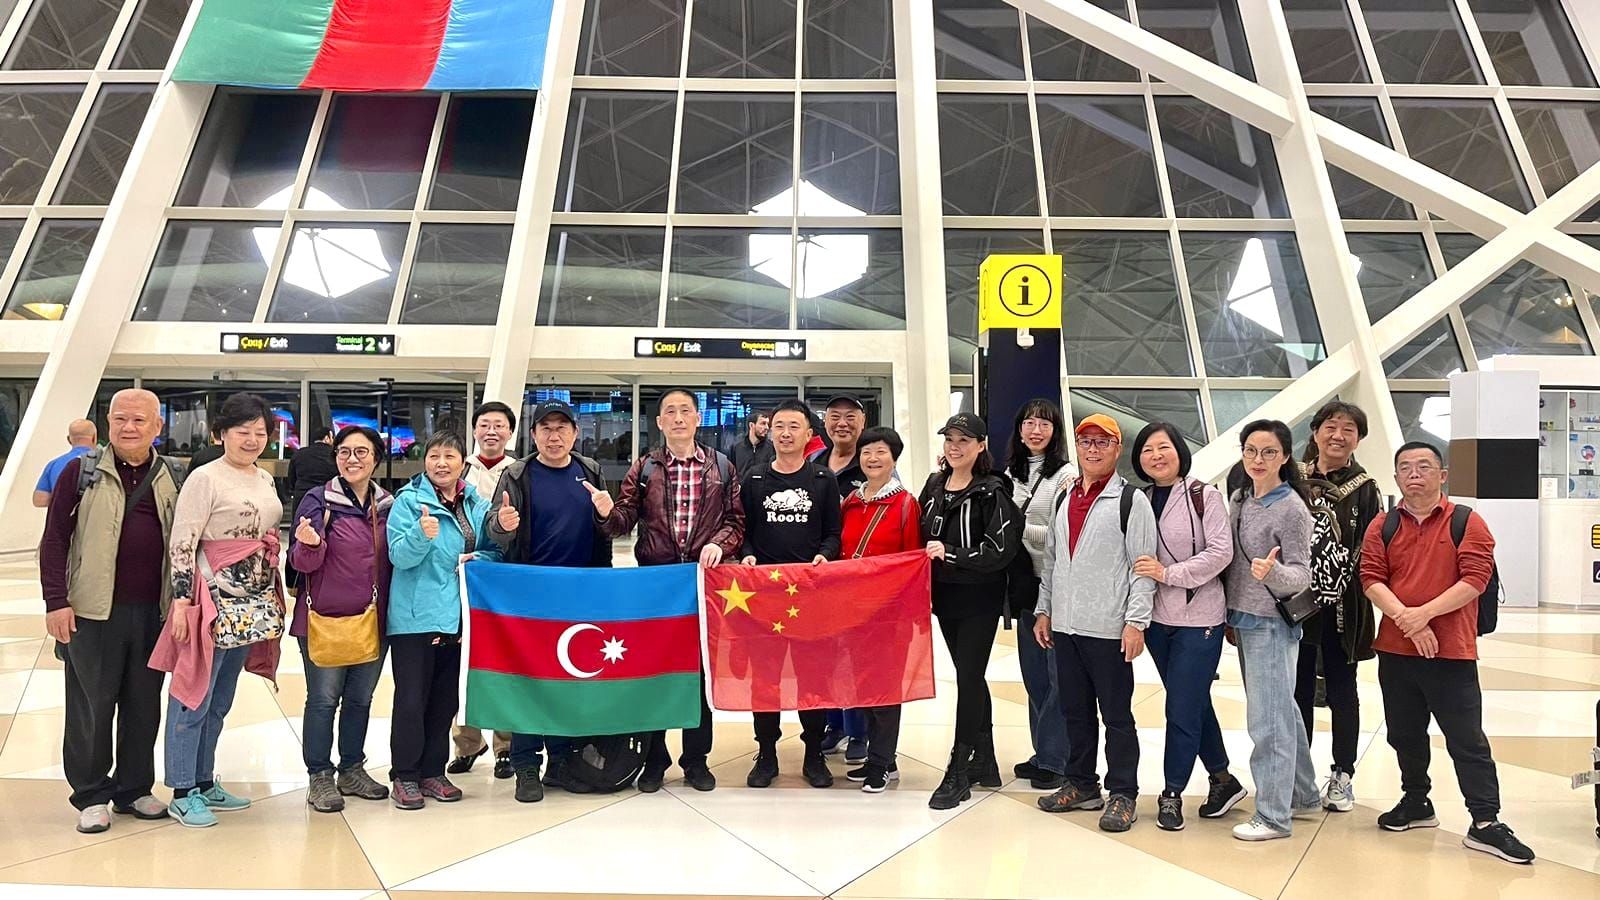 Chinese tourists resume visiting Azerbaijan after Covid-19 [PHOTOS]